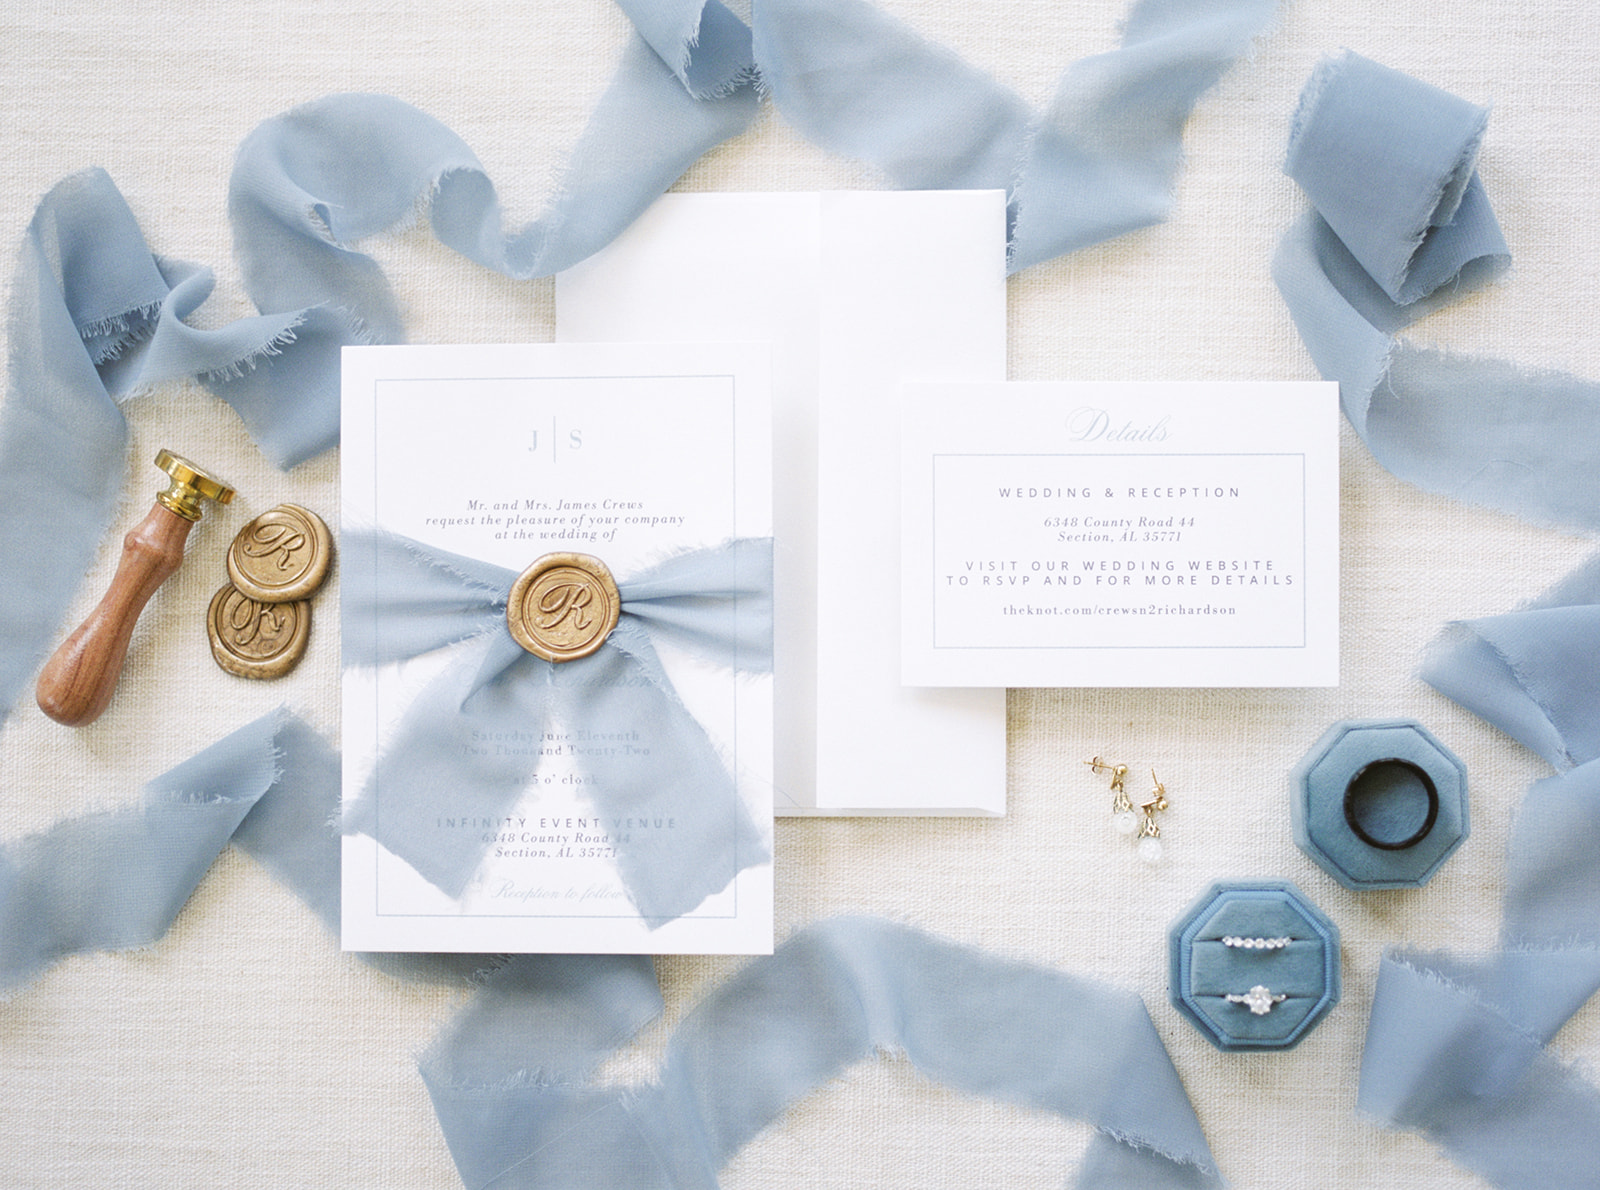 A film photo of a romantic wedding invitation suite for Infinity Event Venue